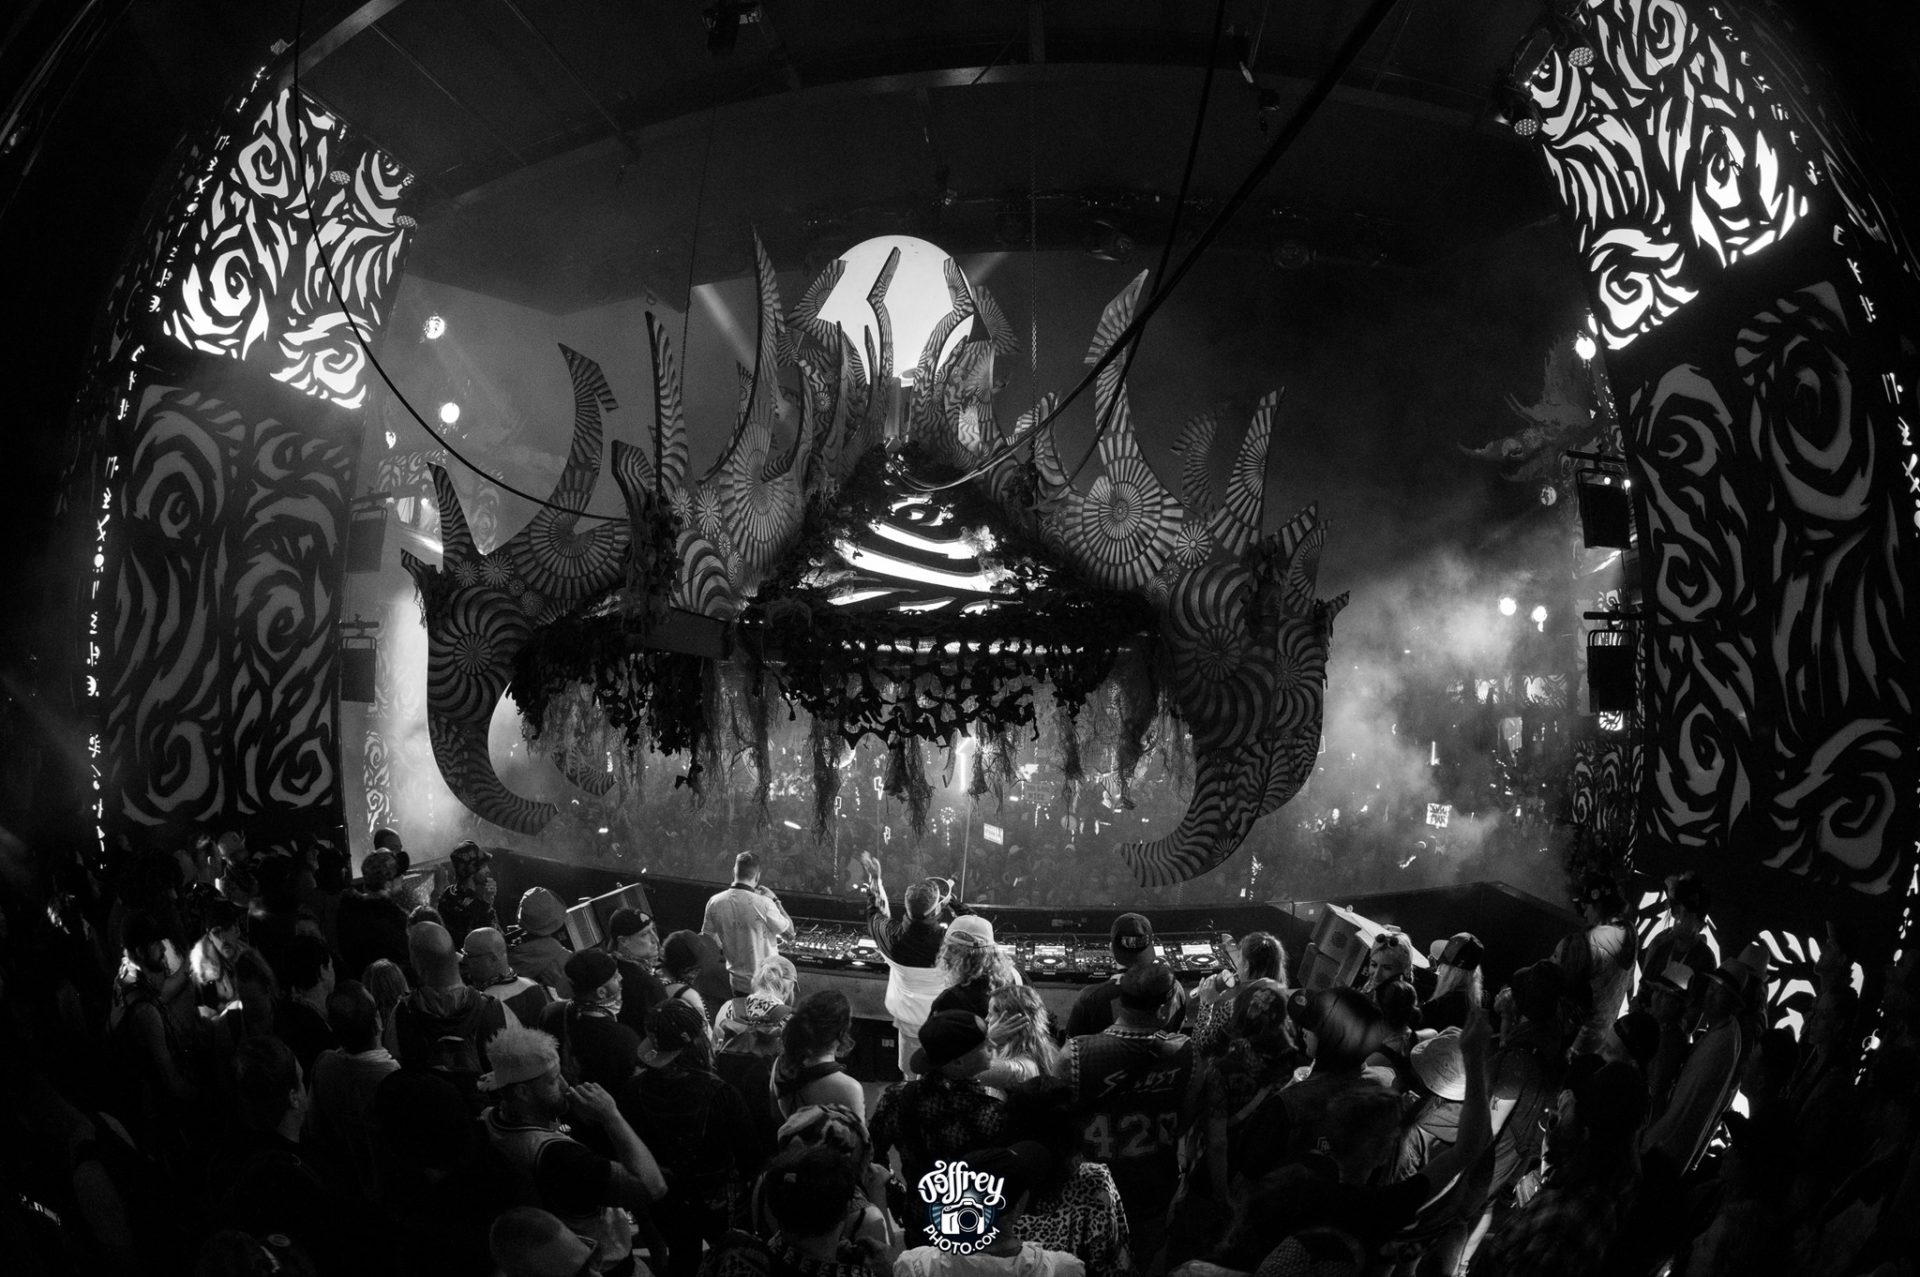 Will Big NGHTMRE be gracing The Village Stage at Shambhala 2023?